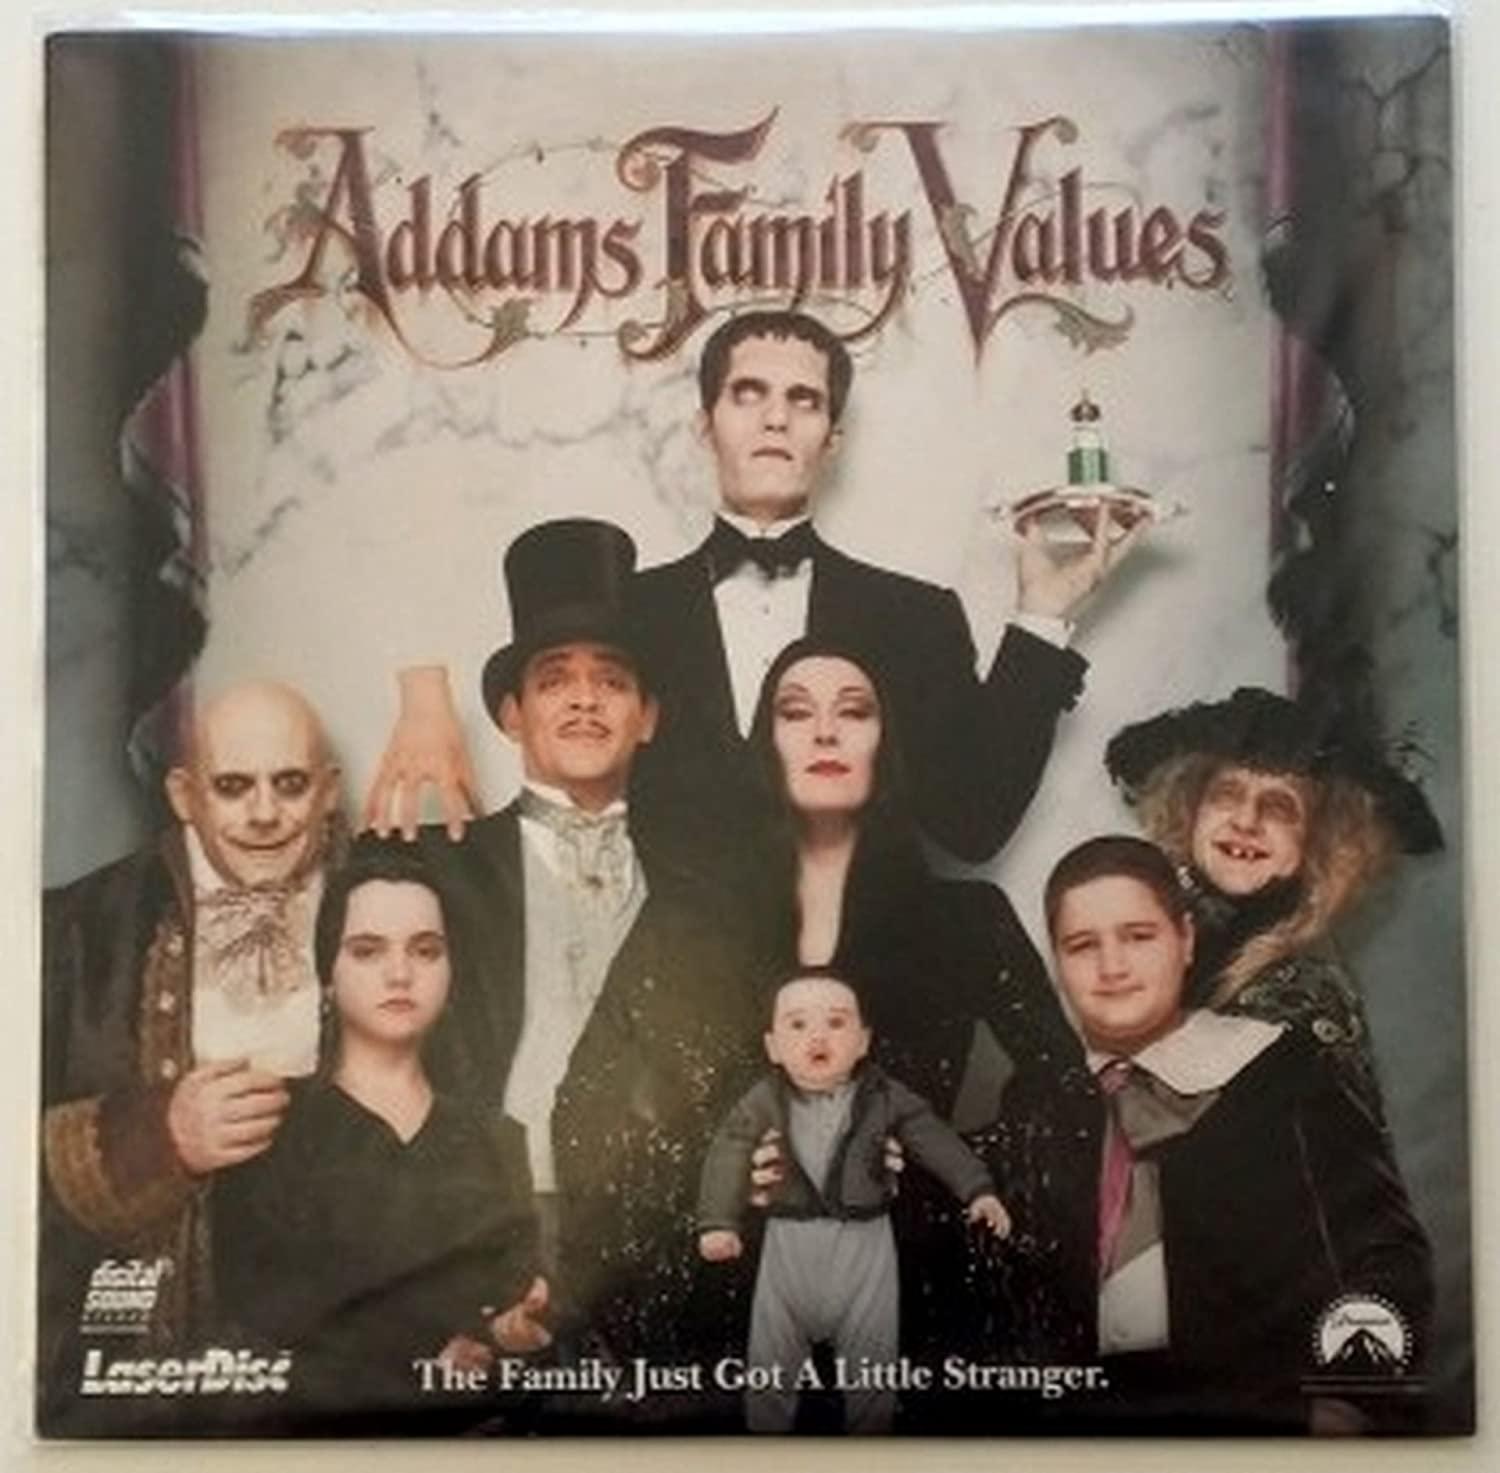 Addams Family Values - Darkside Records